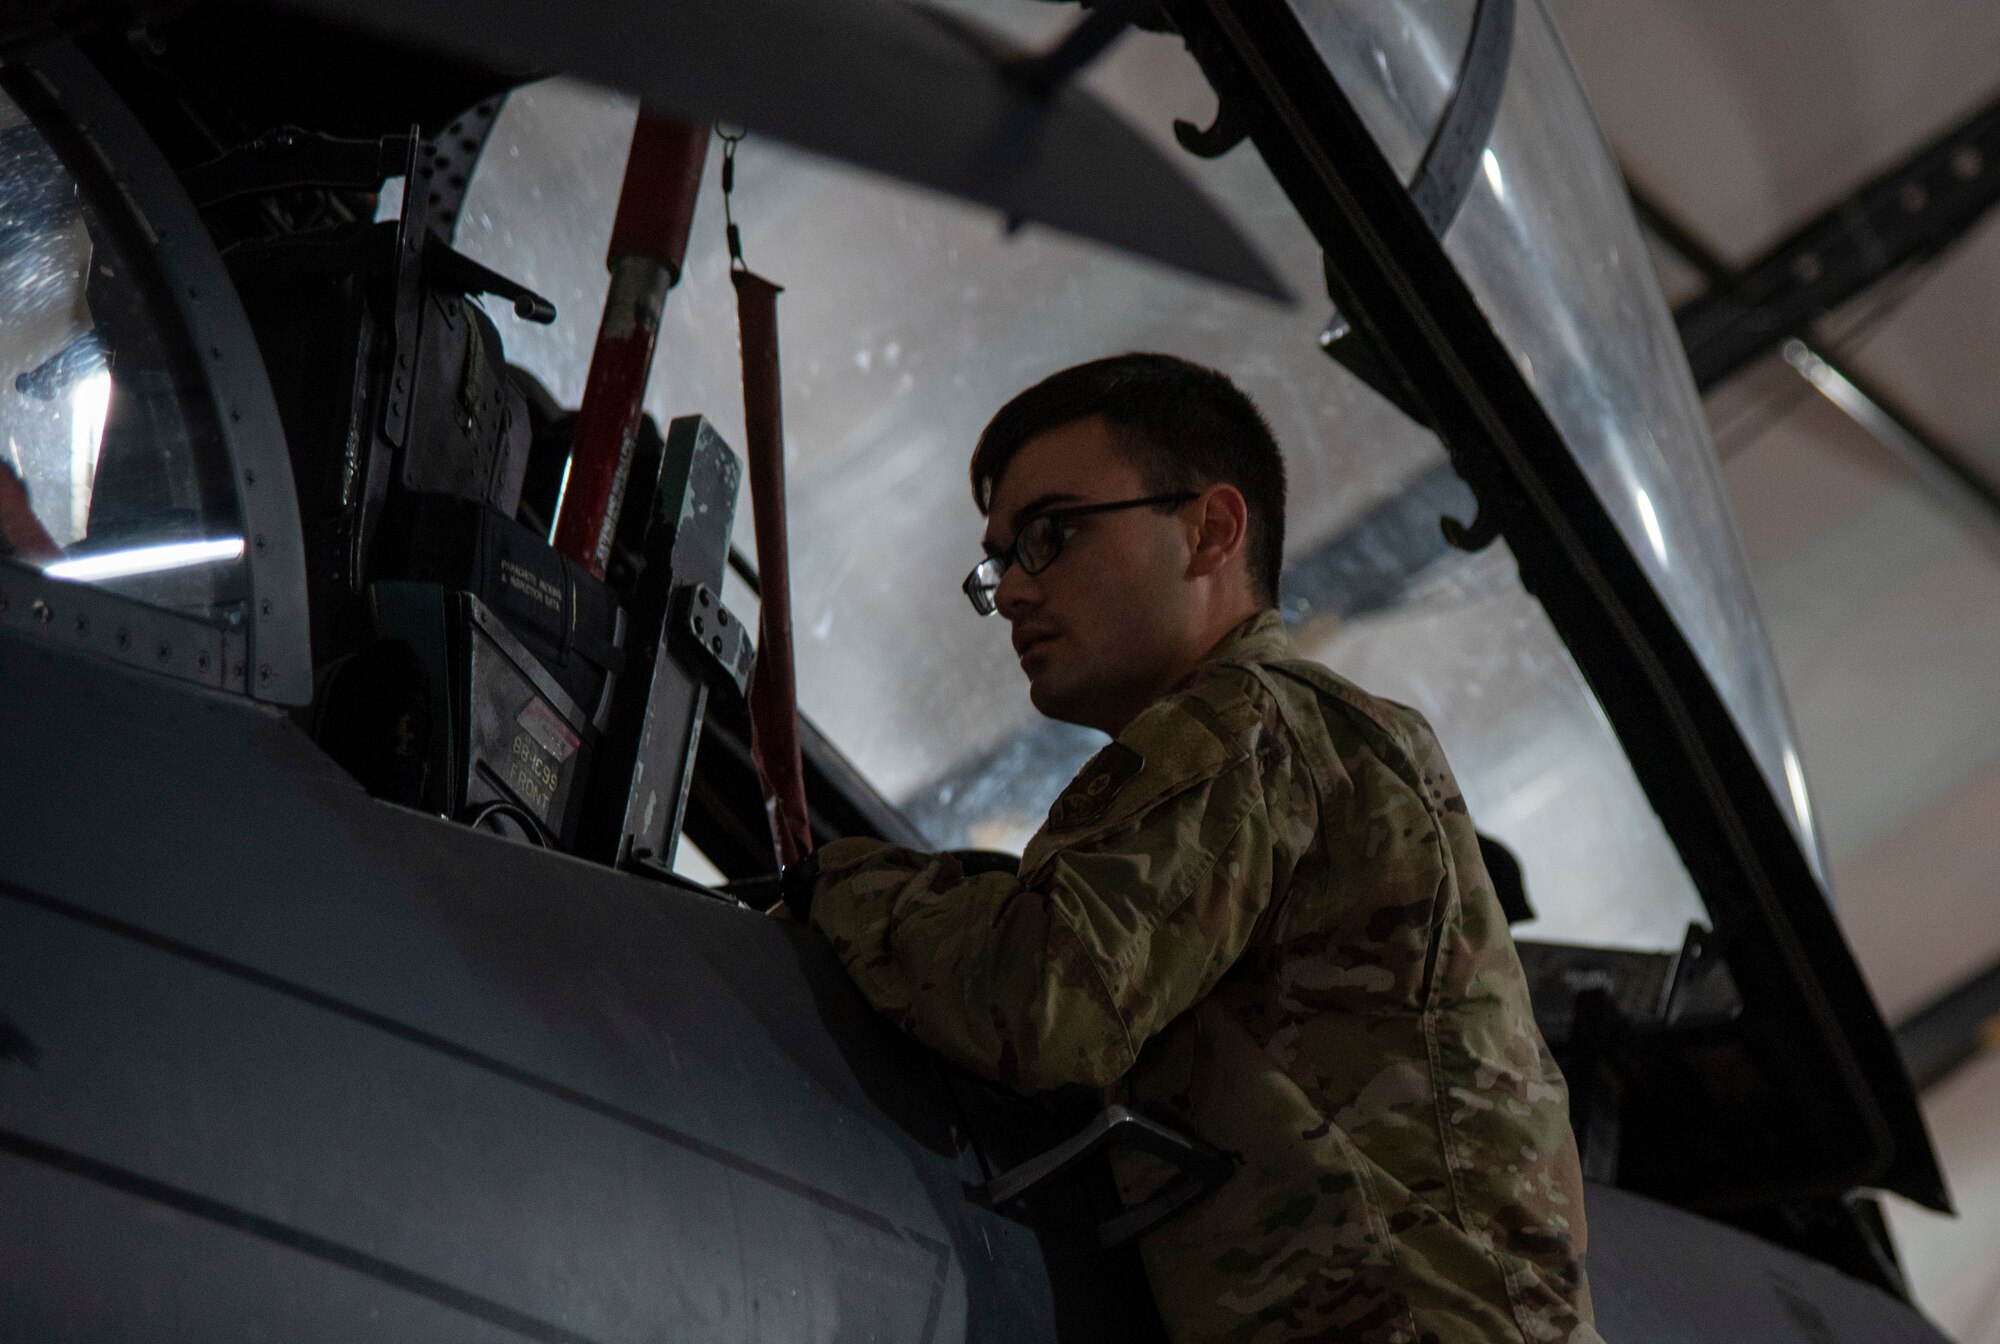 Senior Airman Elijah Gardner, 332d Expeditionary Civil Engineer Programs specialist, looks in the cockpit of an F-15E Strike Eagle as part of "Maintainer for a Day" at an undisclosed location, Southwest Asia, Nov. 25, 2022. "Maintainer for a Day" is a program that allows Airmen from diverse career fields to experience what it’s like to perform maintenance and repair work on an aircraft. (U.S. Air Force photo by: Tech. Sgt. Jim Bentley)